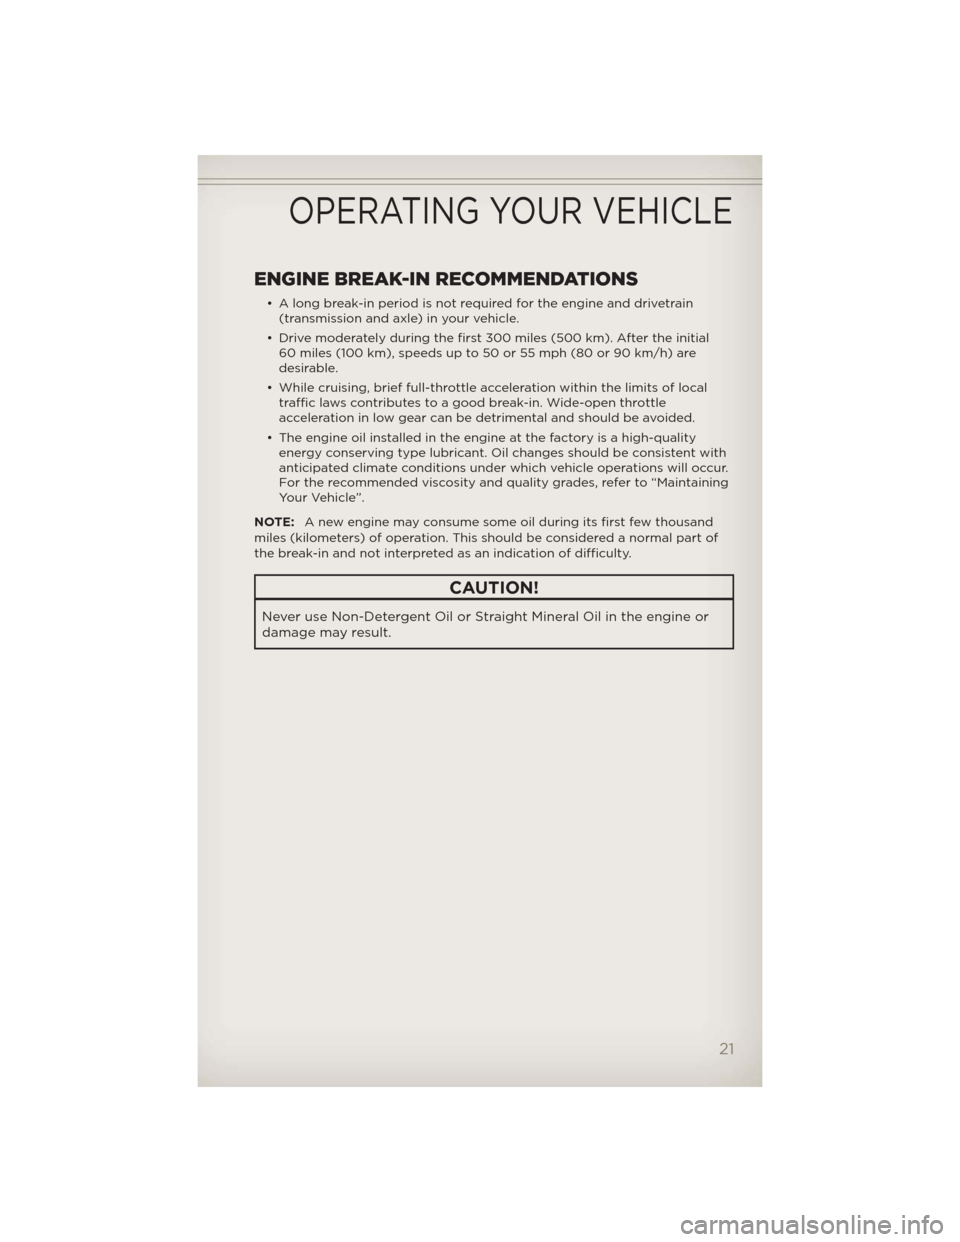 JEEP WRANGLER 2012 JK / 3.G User Guide ENGINE BREAK-IN RECOMMENDATIONS
• A long break-in period is not required for the engine and drivetrain
(transmission and axle) in your vehicle.
• Drive moderately during the first 300 miles (500 k